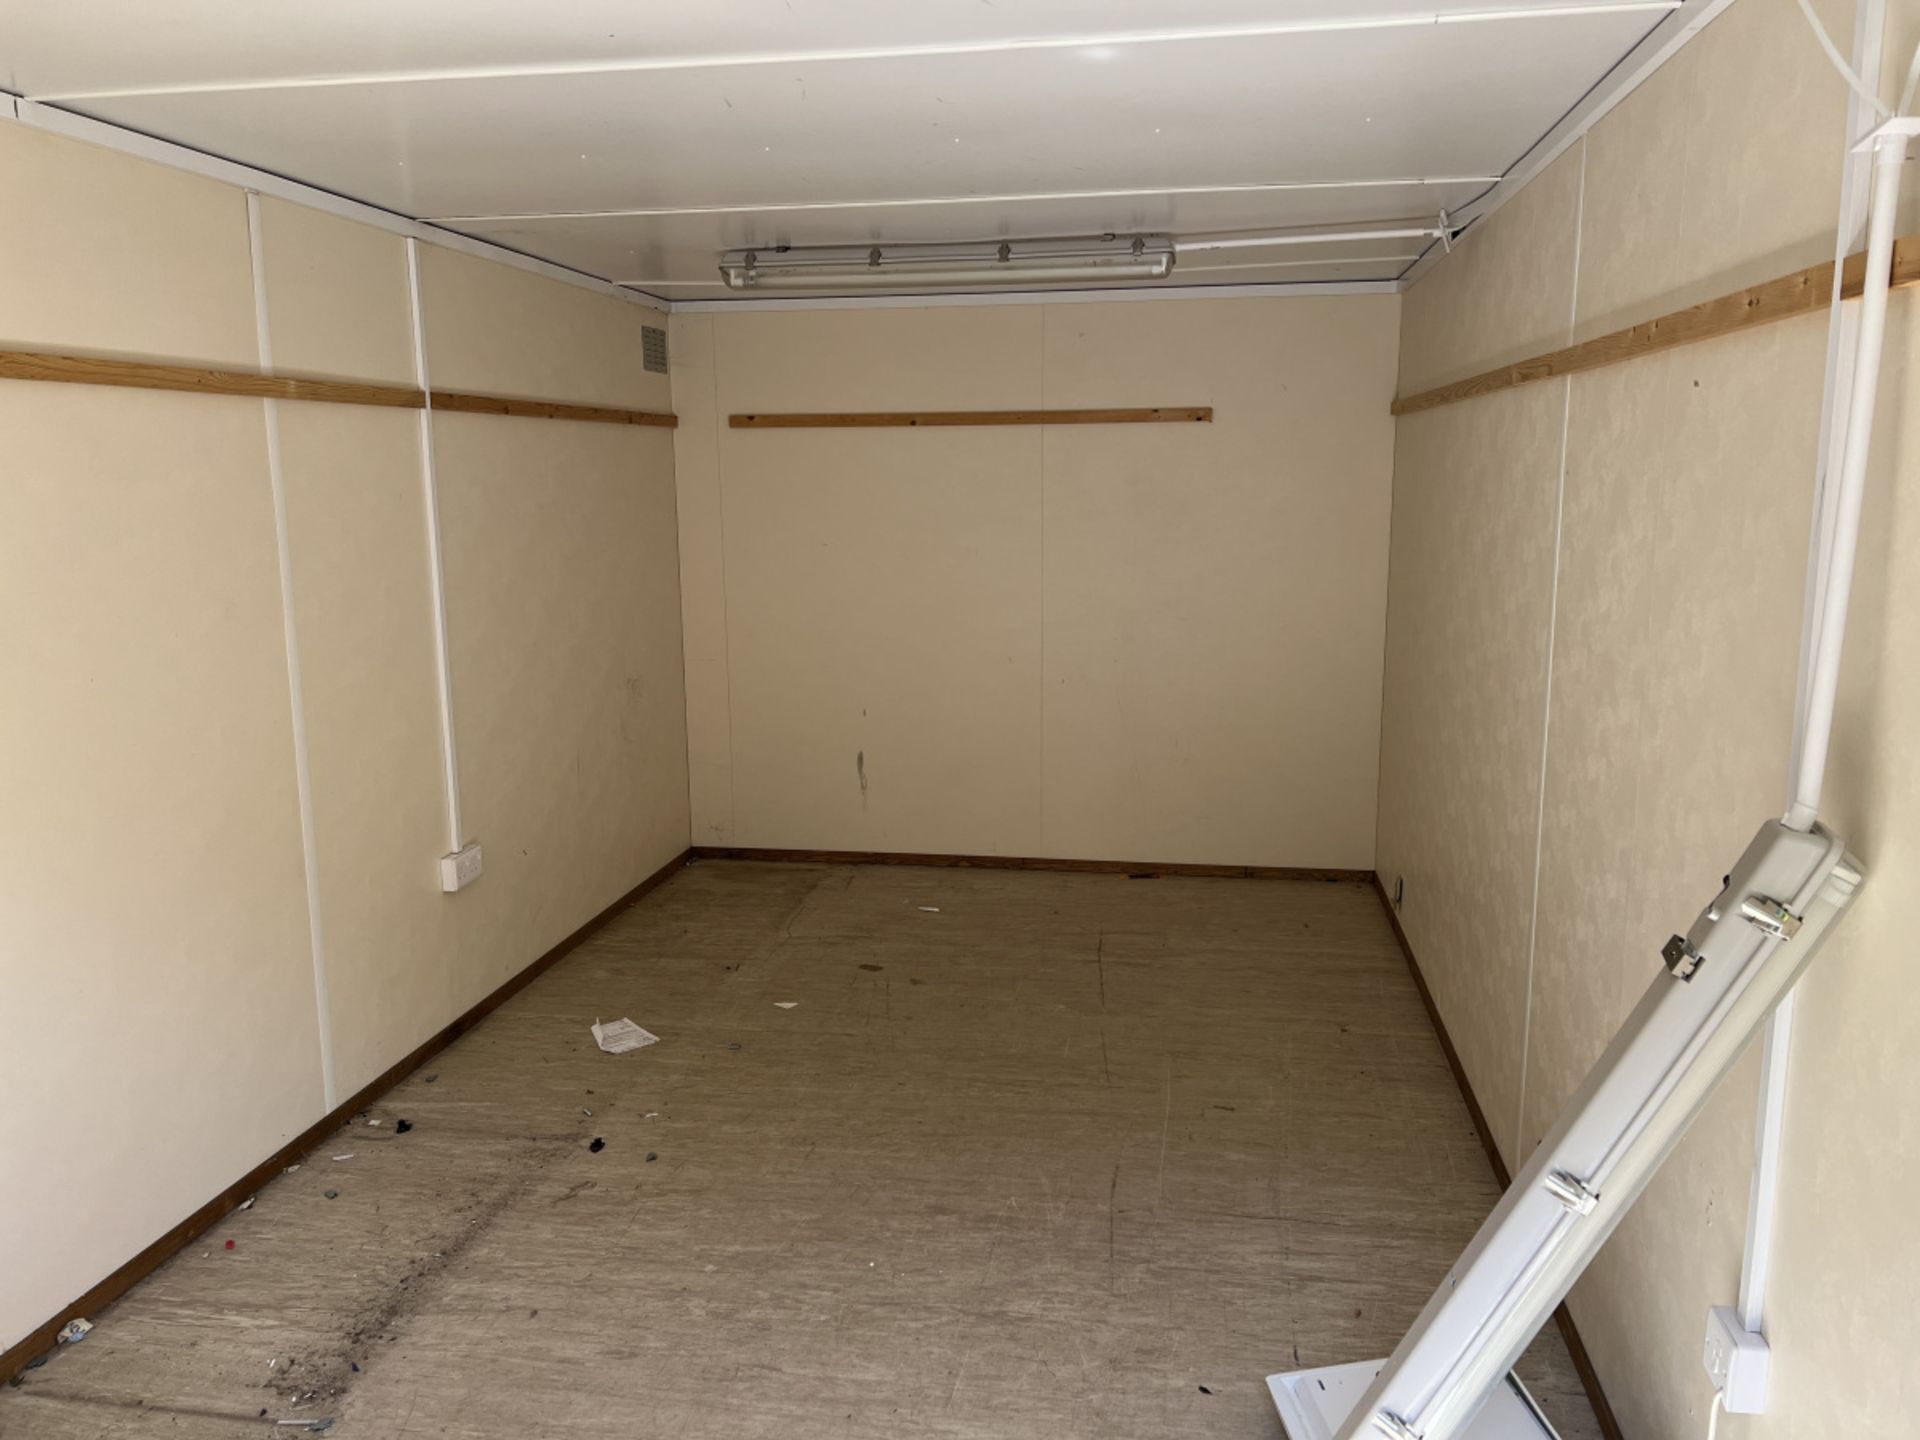 18ft portable accommodation cabin with single door - fitted floor, walls, ceiling and electrics - Image 6 of 15